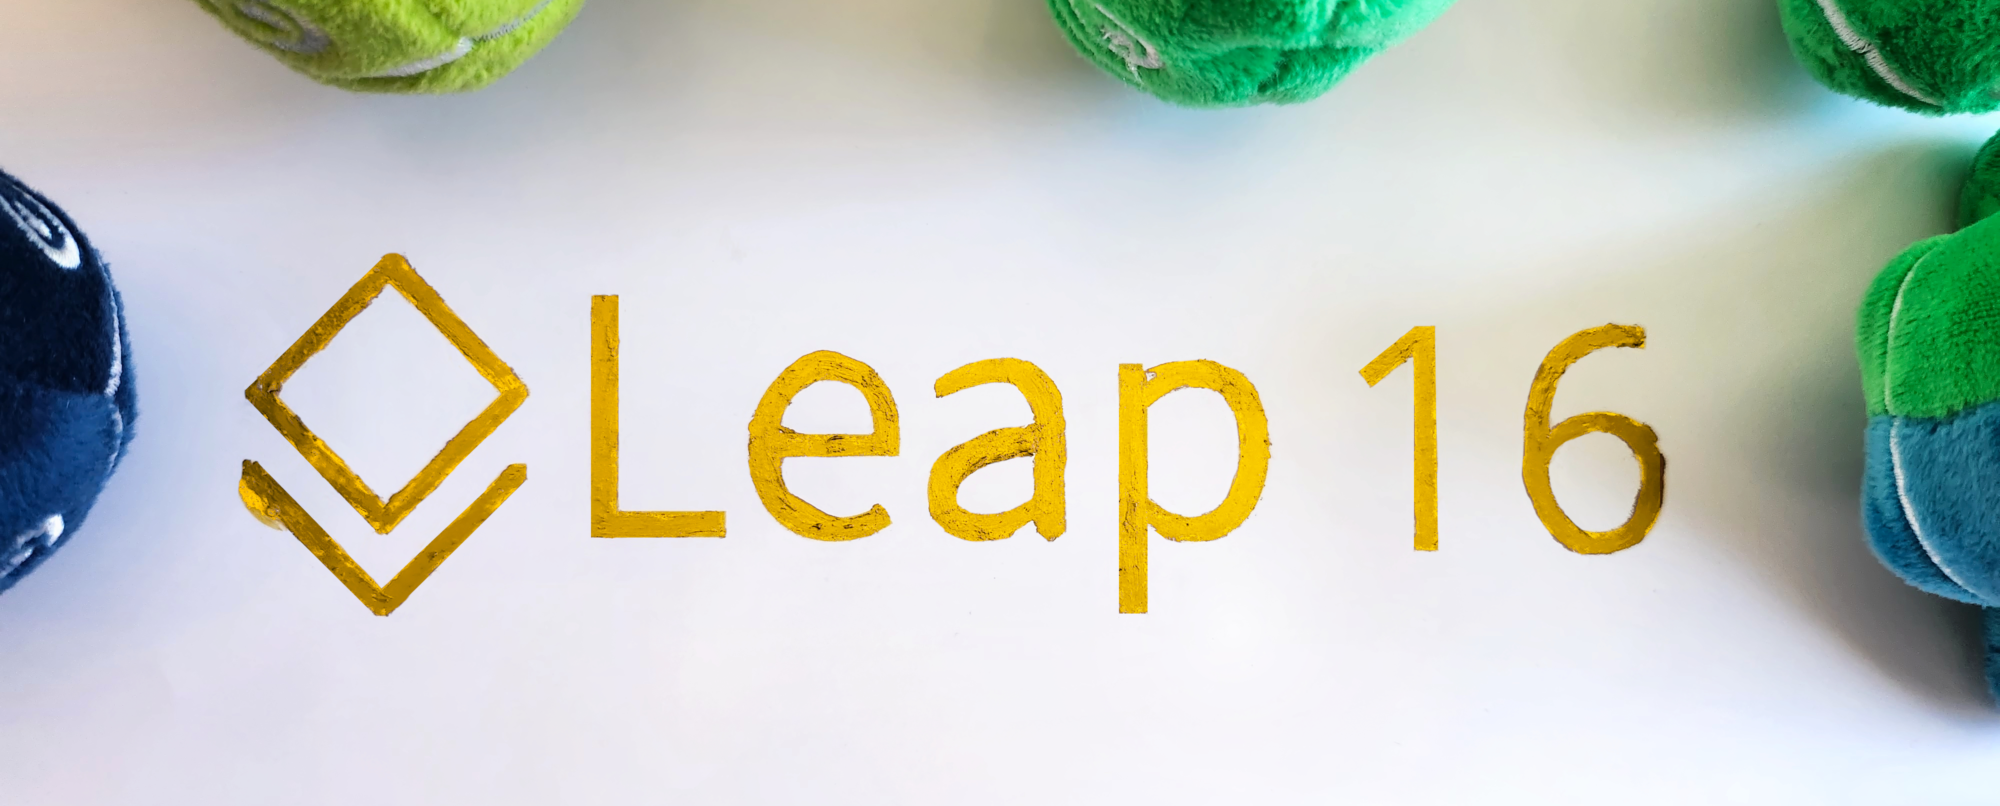 OpenSuse Leap 16 confirmed, will not be immutable by default